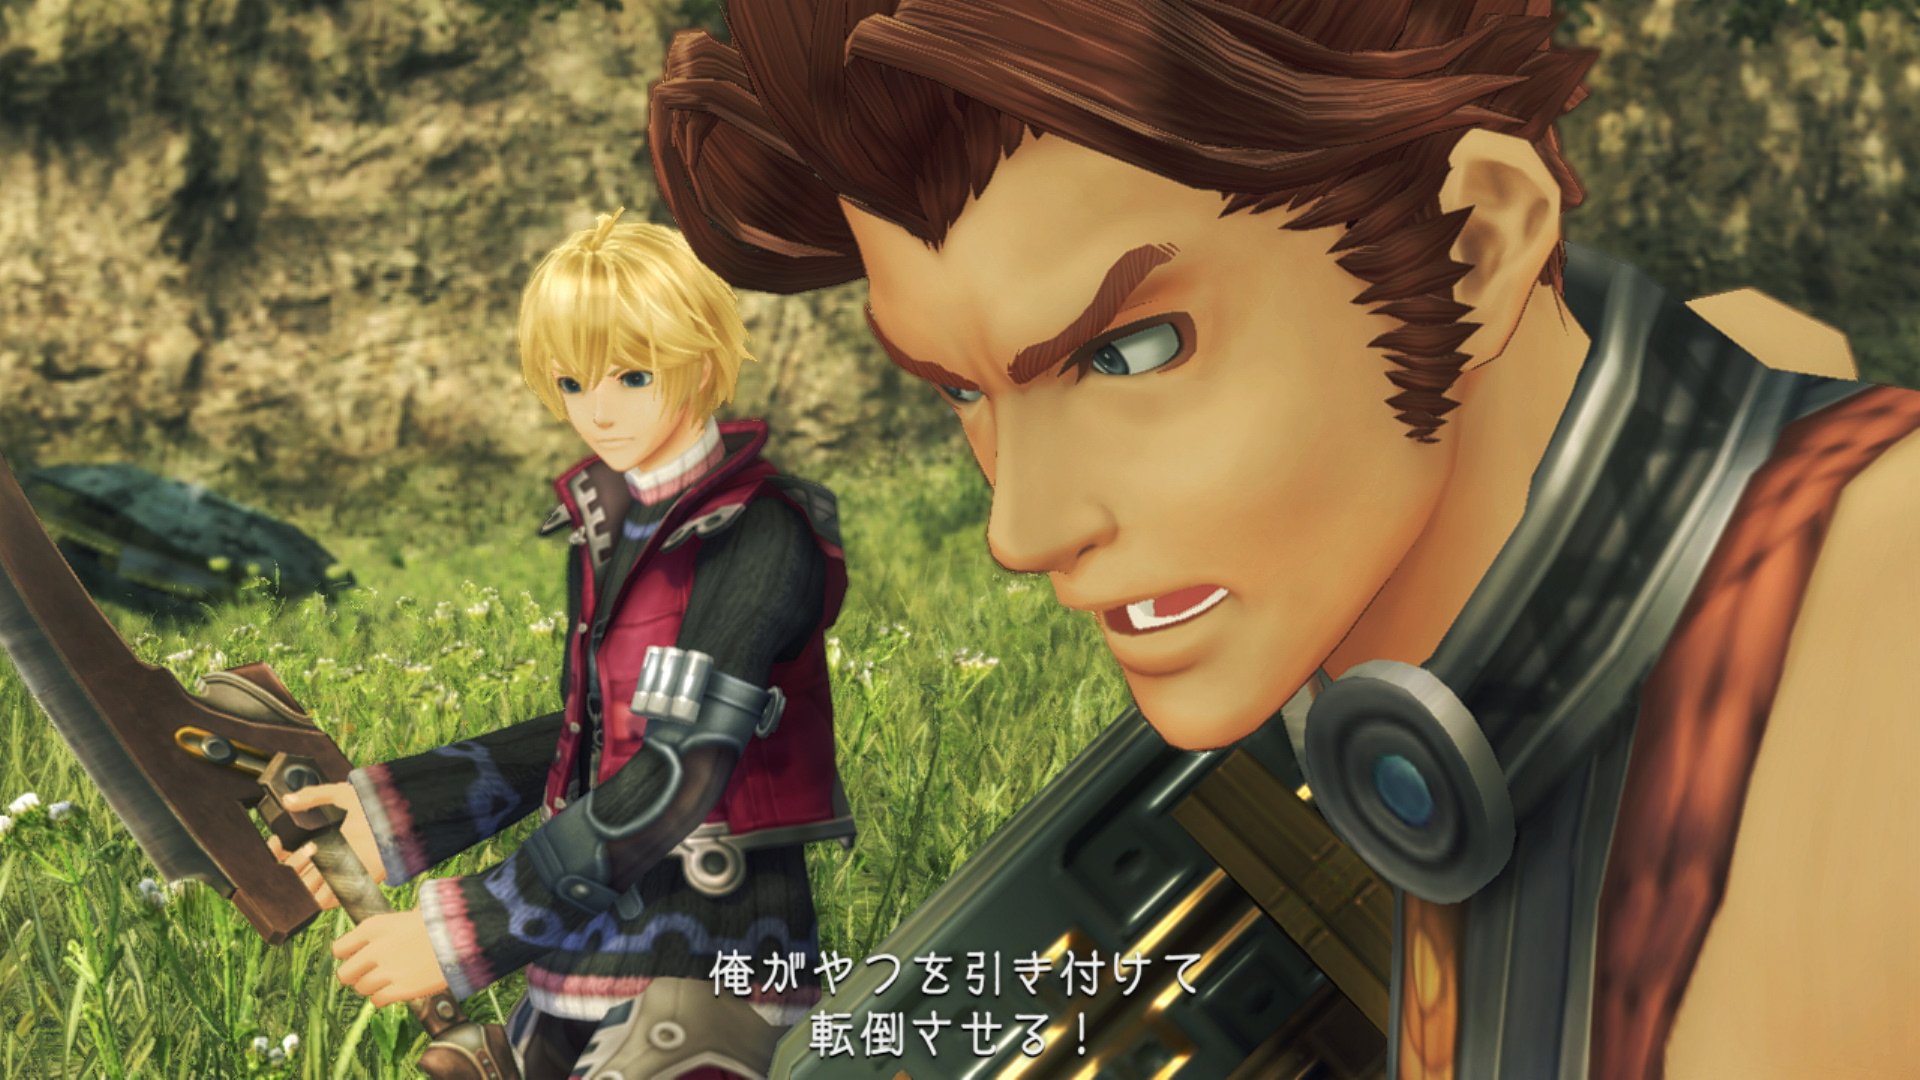 Xenoblade Chronicles, Xenoblade Chronicles: Definitive Edition, Nintendo, Nintendo Switch, Switch, US, Europe, Japan, gameplay, features, release date, price, trailer, screenshots, news, update, characters, cast